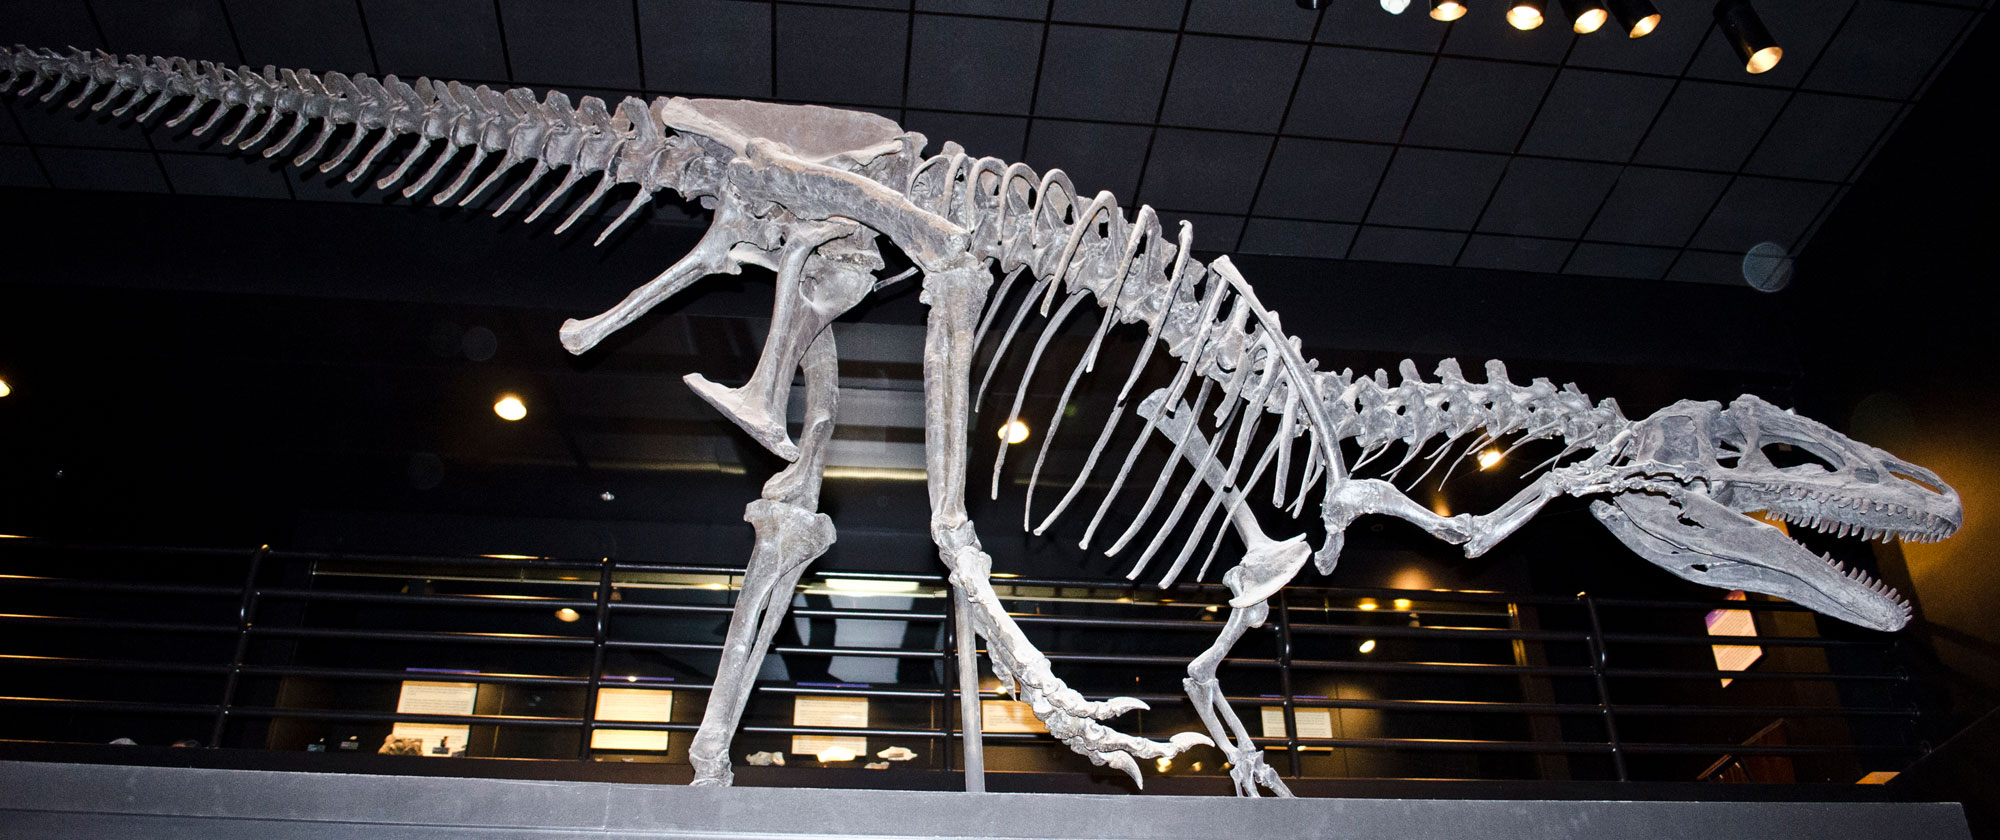 Photograph of a skeleton of an Allosaurus fragilis specimen from the Jurassic Morrison Formation of Wyoming on display in a museum. The photo shows a predatory dinosaur standing on its larger hind legs and one of its shorter front legs, while it uses its other front leg to scratch its head. The dinosaur has a relatively large skull with pointed teeth. The long tail is held off the ground.